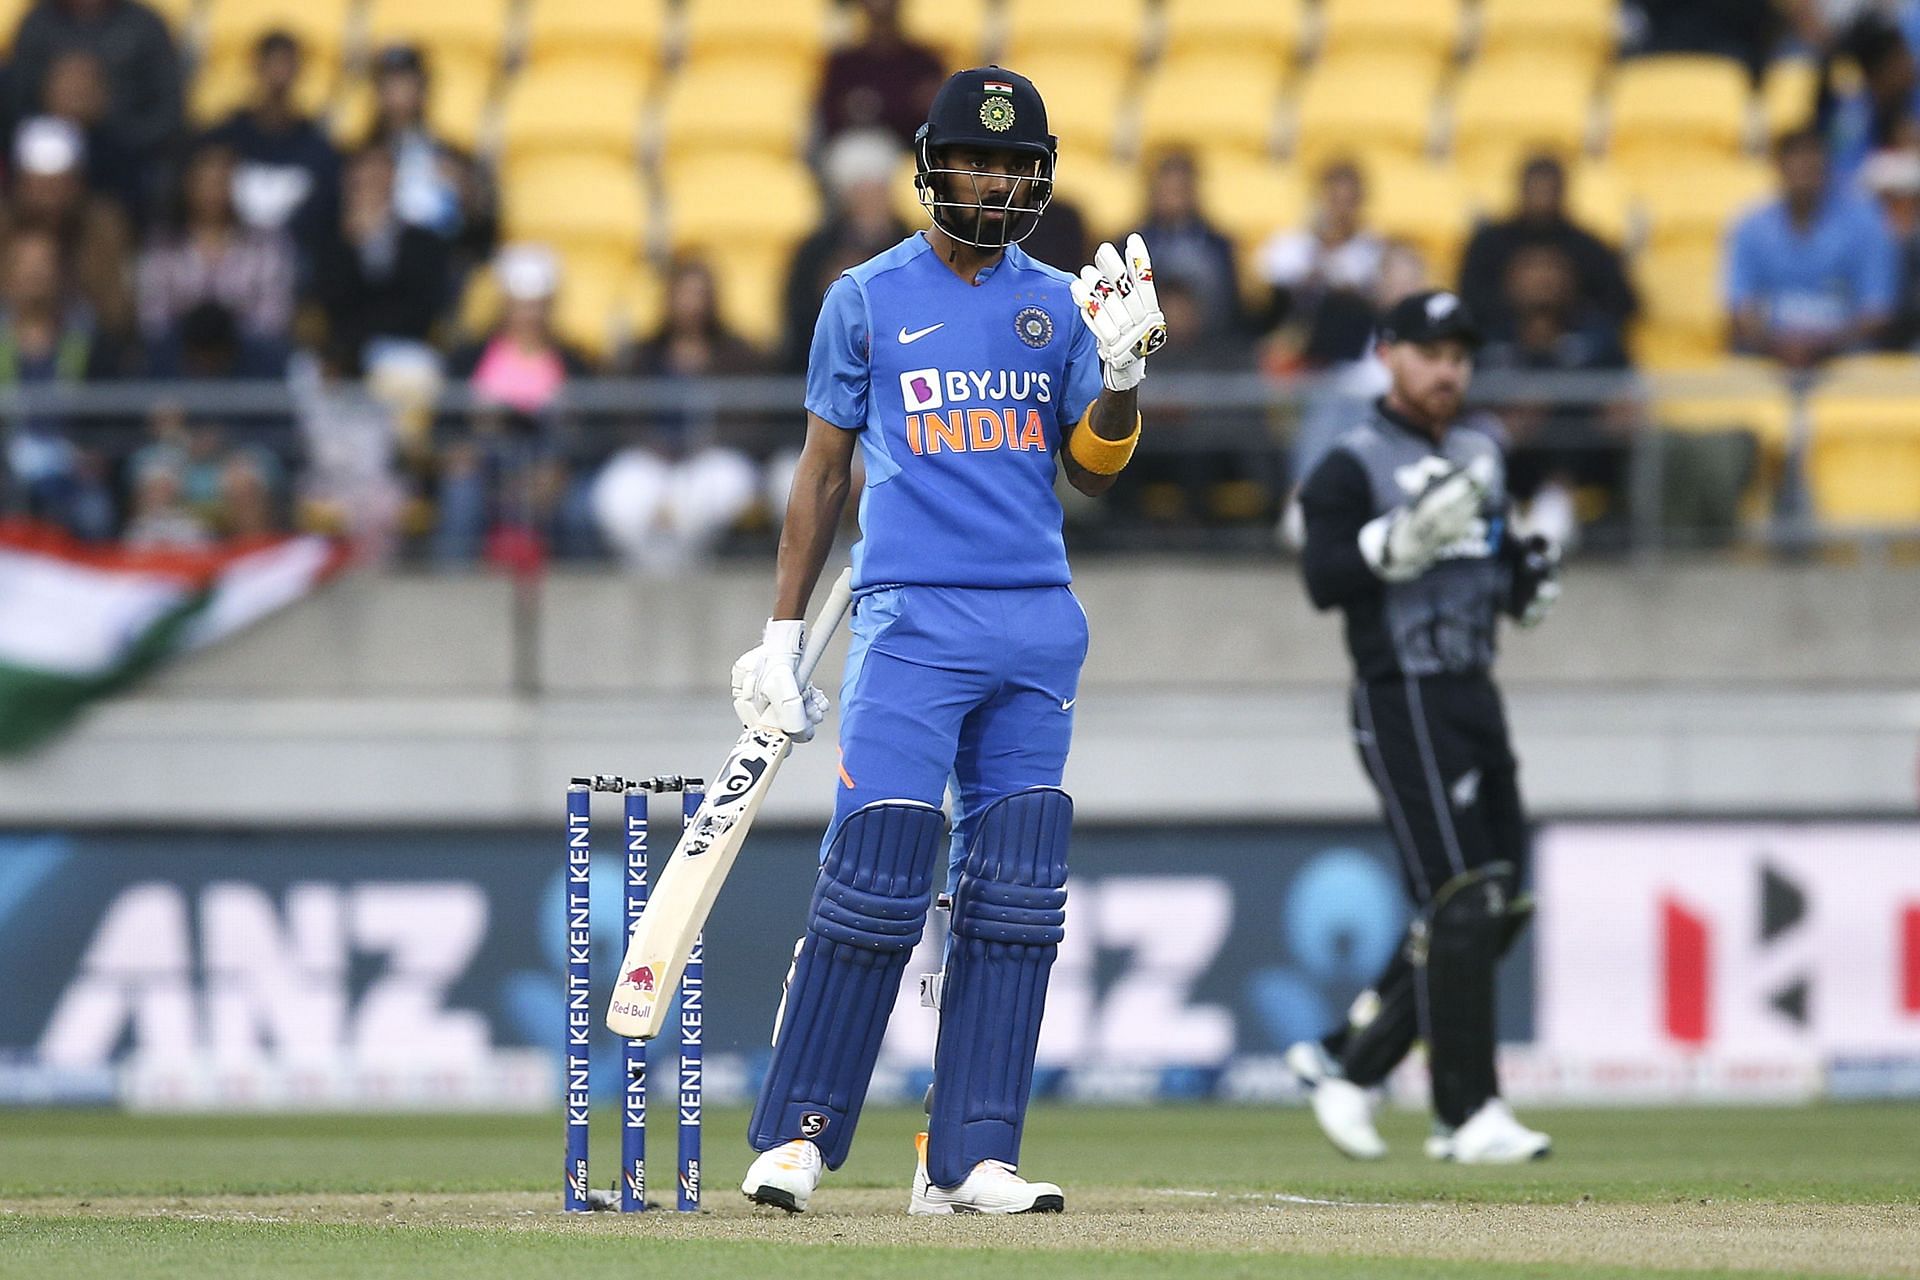 IND vs NZ 2021 India vs New Zealand live telecast channel in India and live streaming details